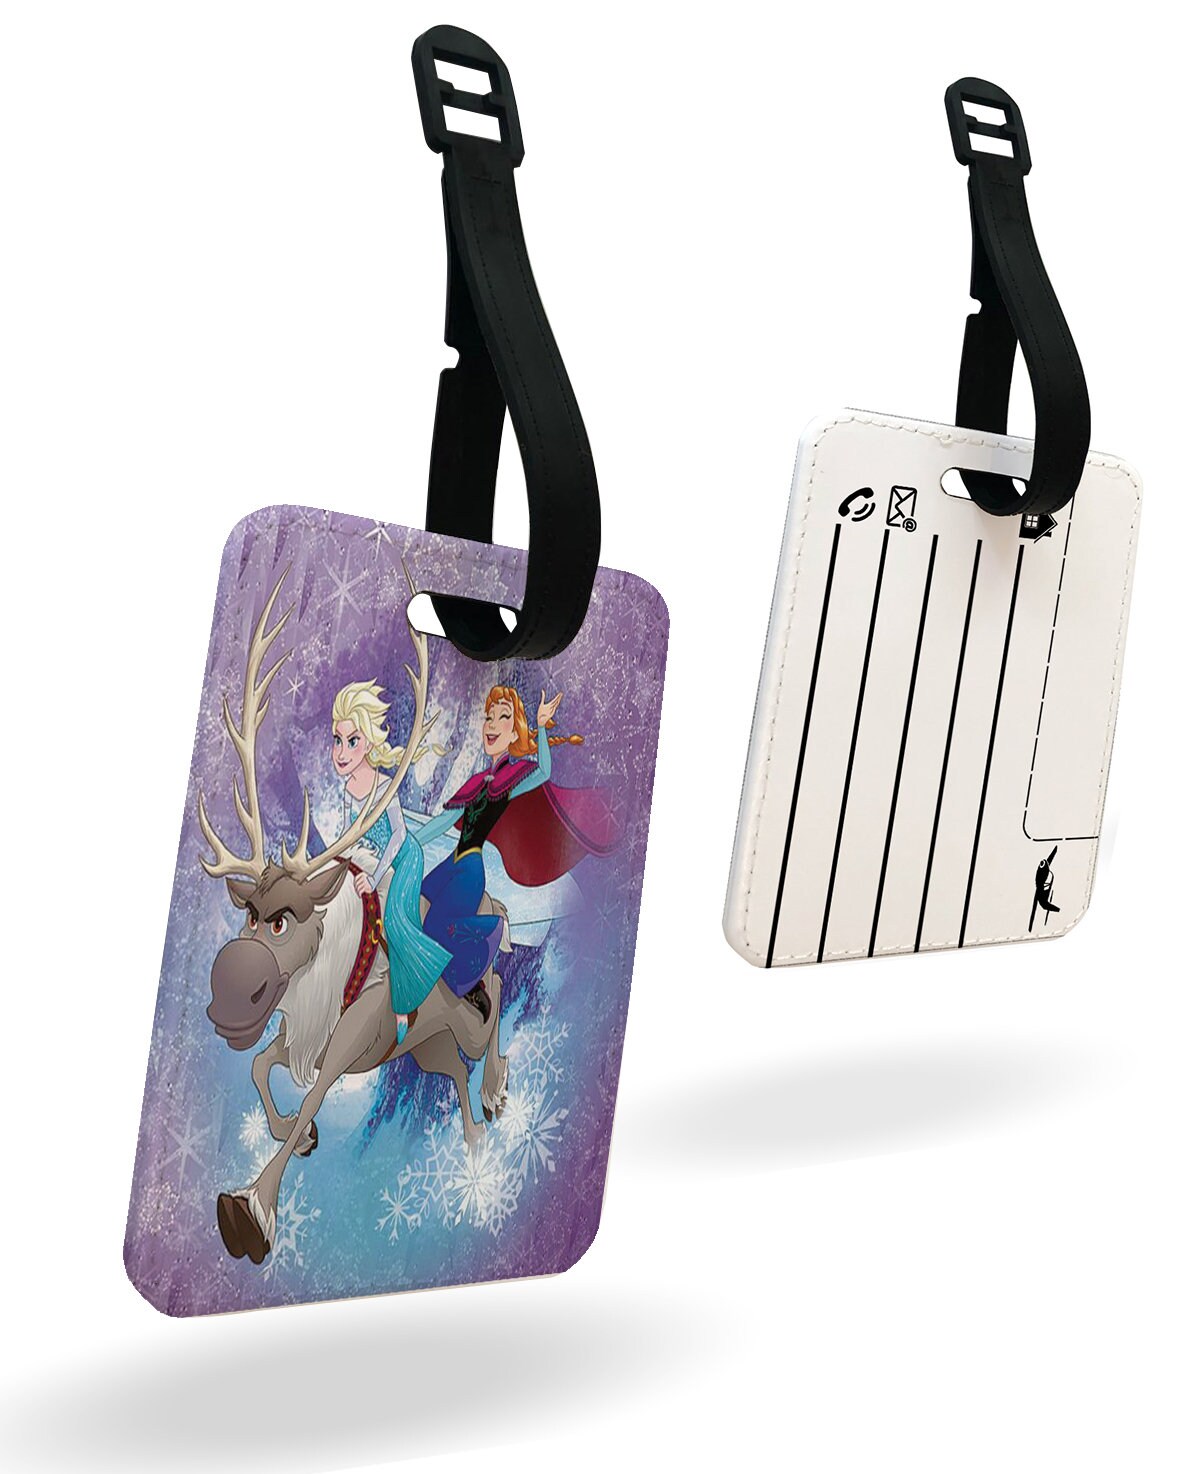 Personalised Faux Leather Passport Cover and Luggage Tag Disney Frozen Olaf Snowman Elsa Anna Sisters Vintage Disneyland Friends Gift